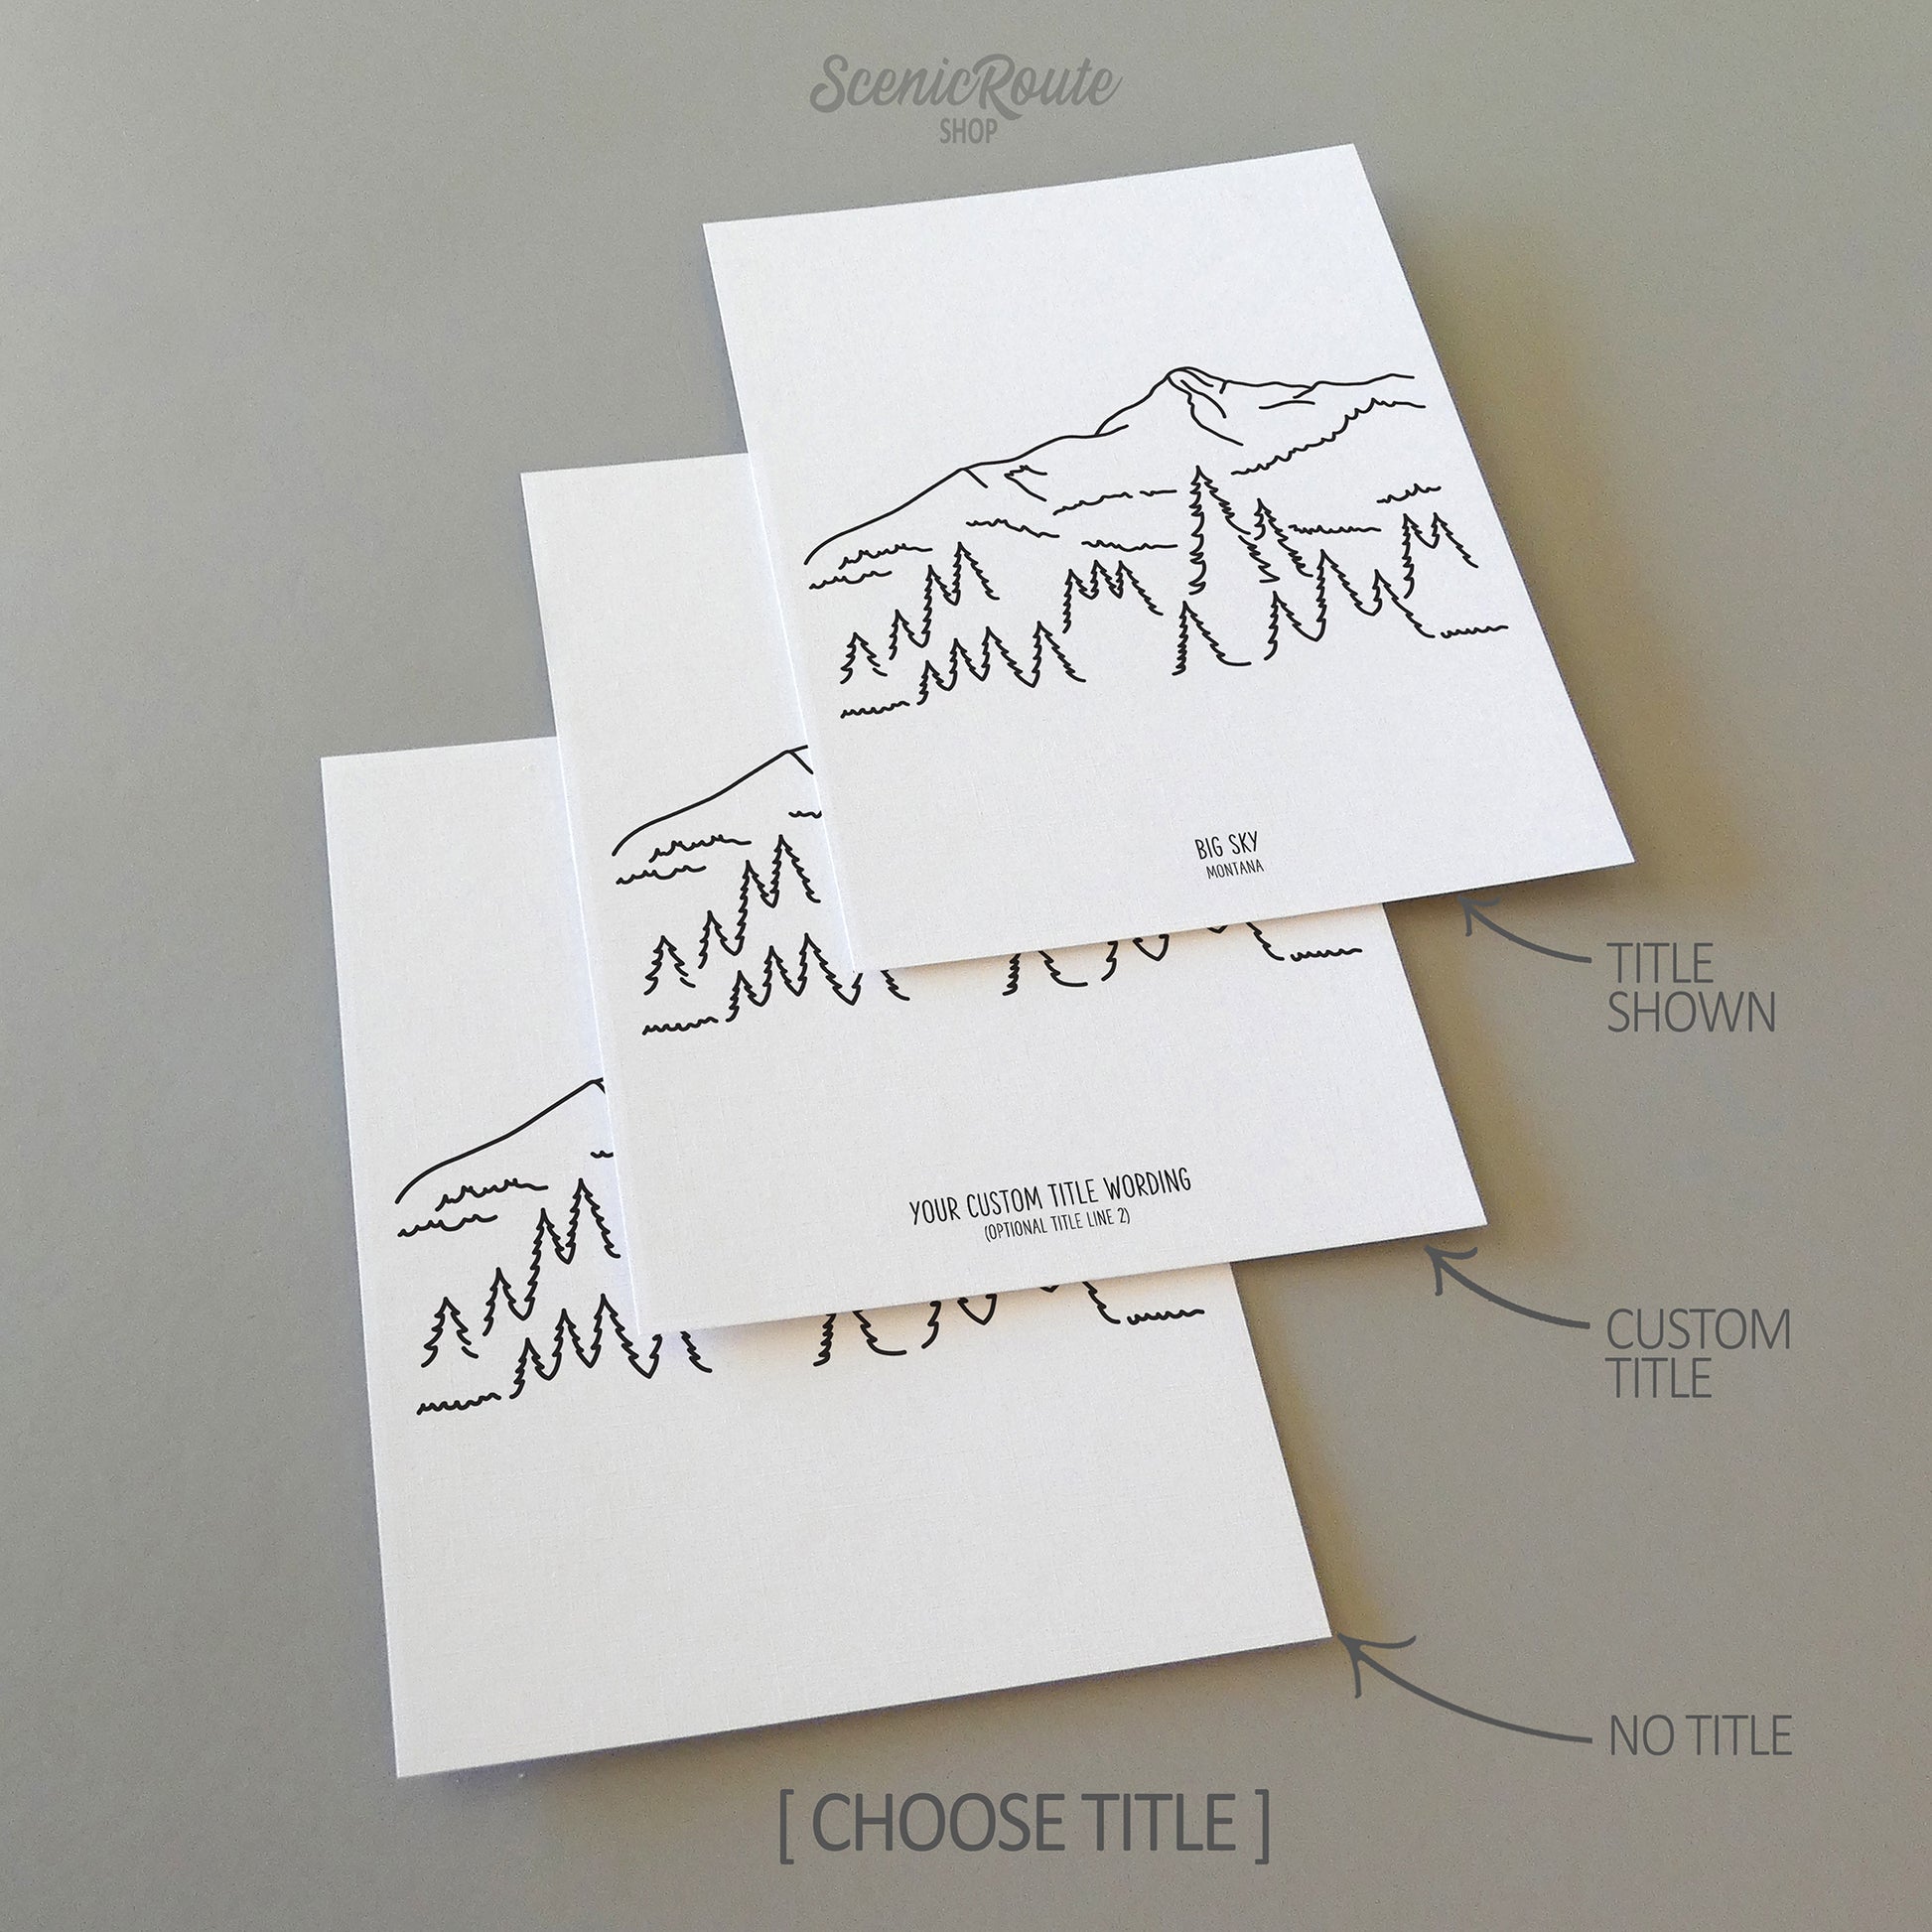 Three line art drawings of the mountains of Montana Big Sky on white linen paper with a gray background.  The pieces are shown with title options that can be chosen and personalized.